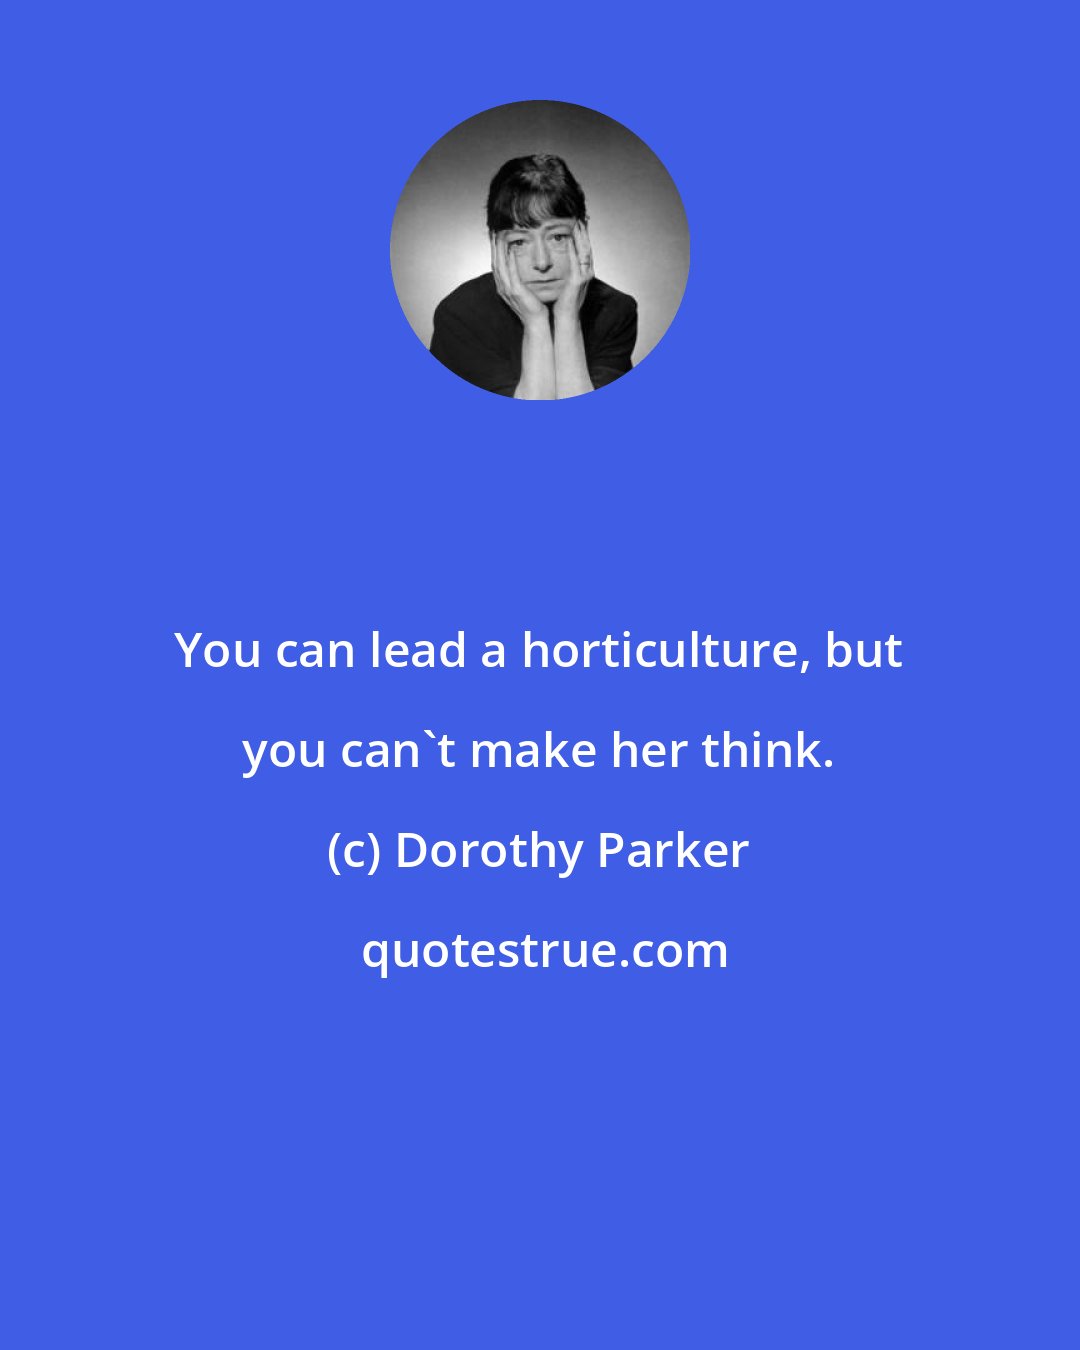 Dorothy Parker: You can lead a horticulture, but you can't make her think.